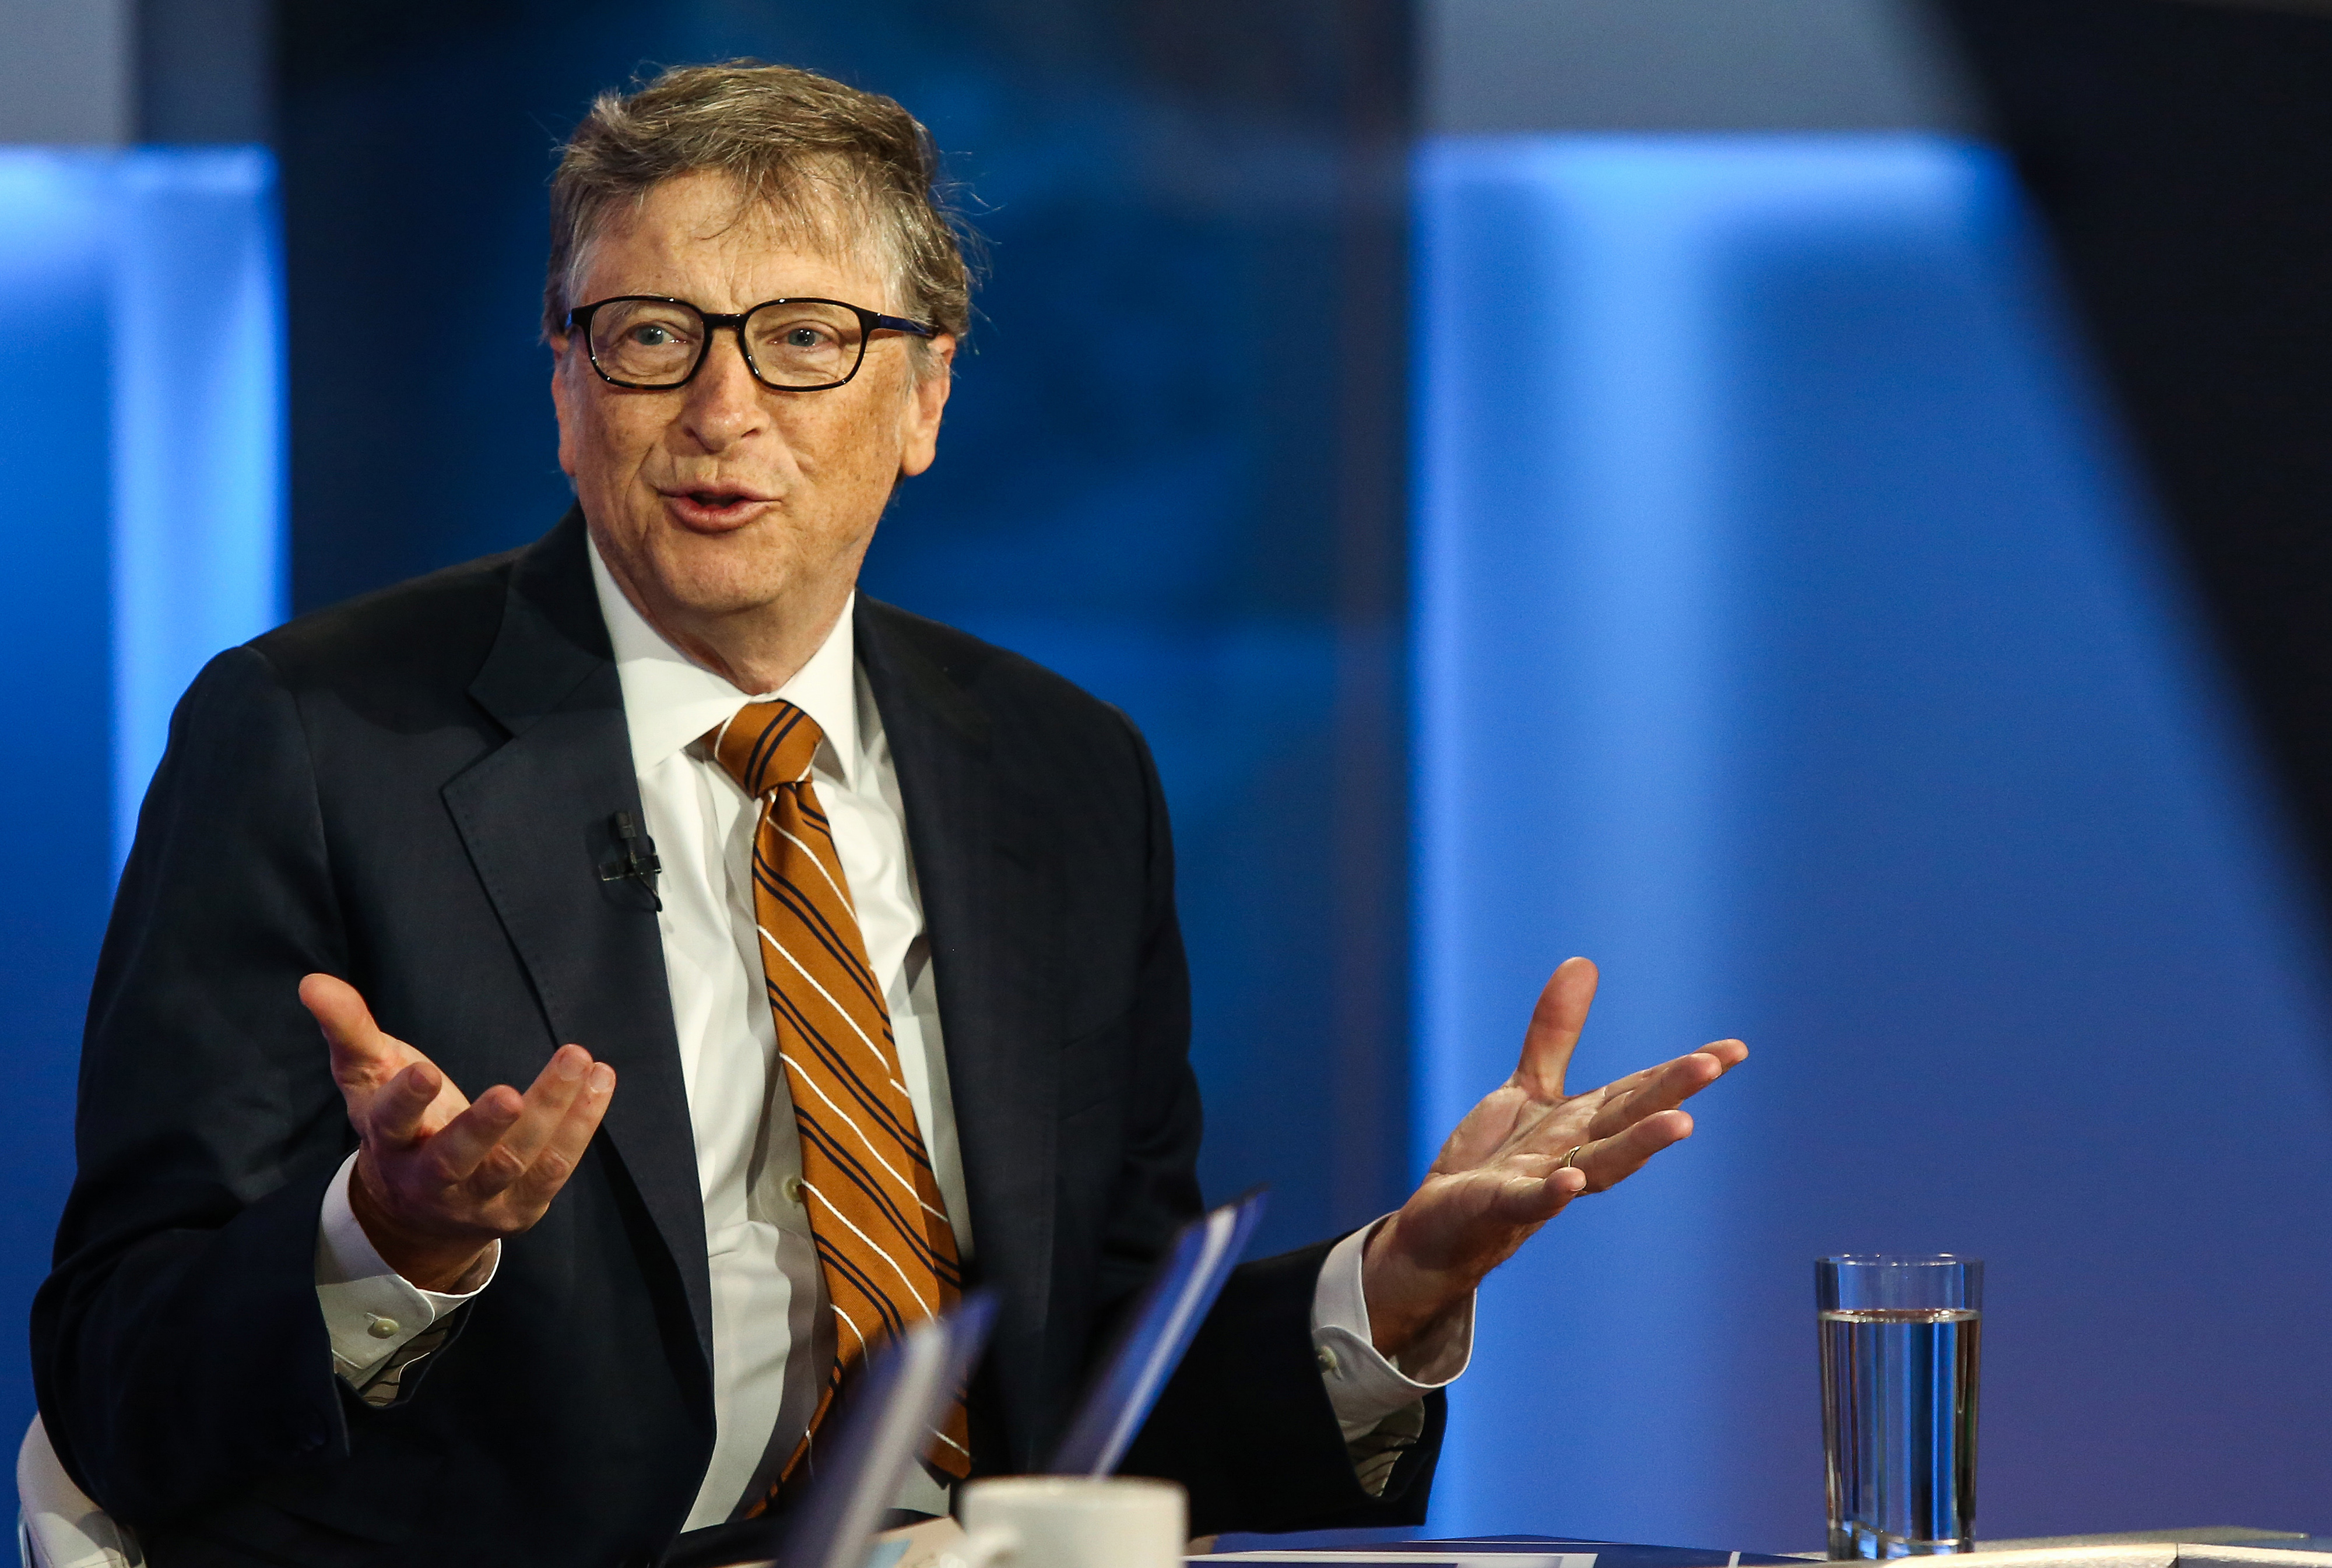 Bill Gates speaks during a Bloomberg Television interview in New York on Feb. 23, 2016. (Bloomberg via Getty Images)